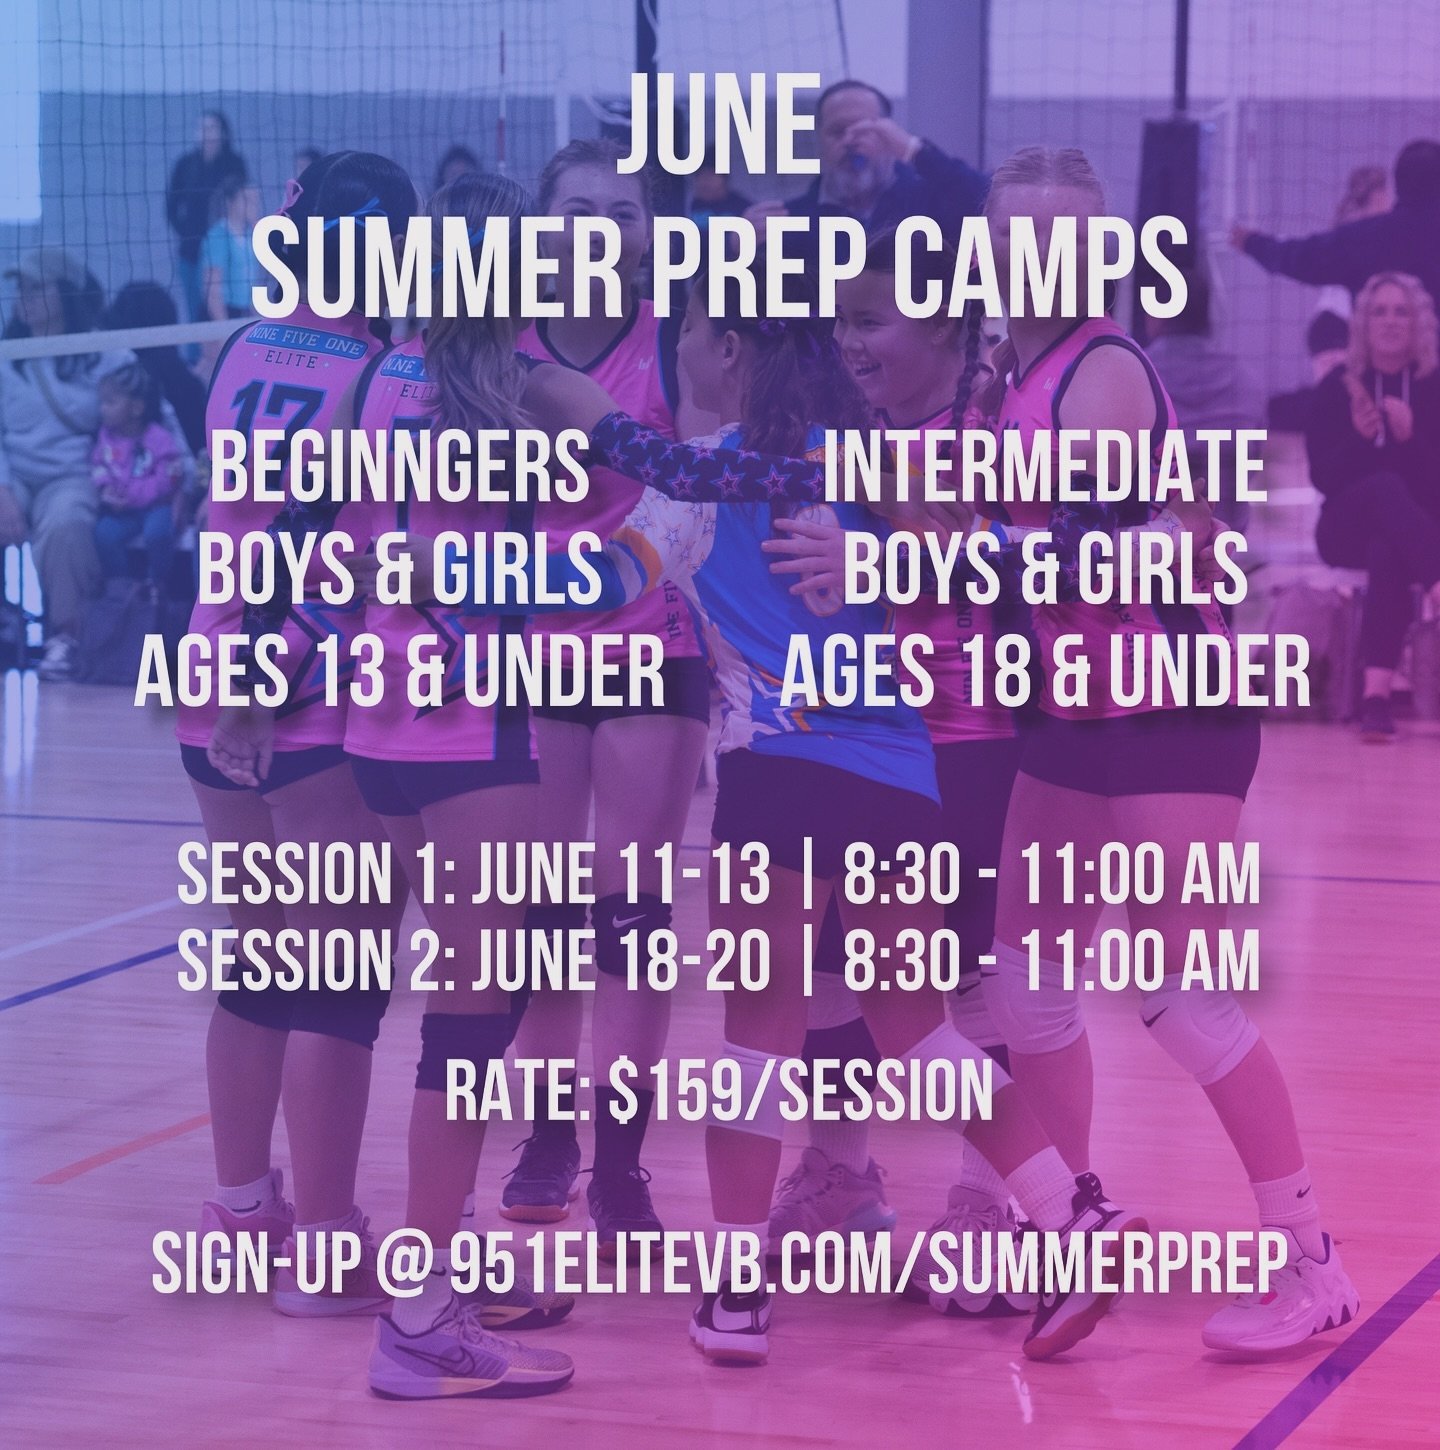 Get prepared for your school or club tryouts at our June Summer Prep Camps! These camps are an excellent opportunity to sharpen your skills and fundamentals. Get signed up at 951elitevb.com/summerprep
#951elitevolleyball